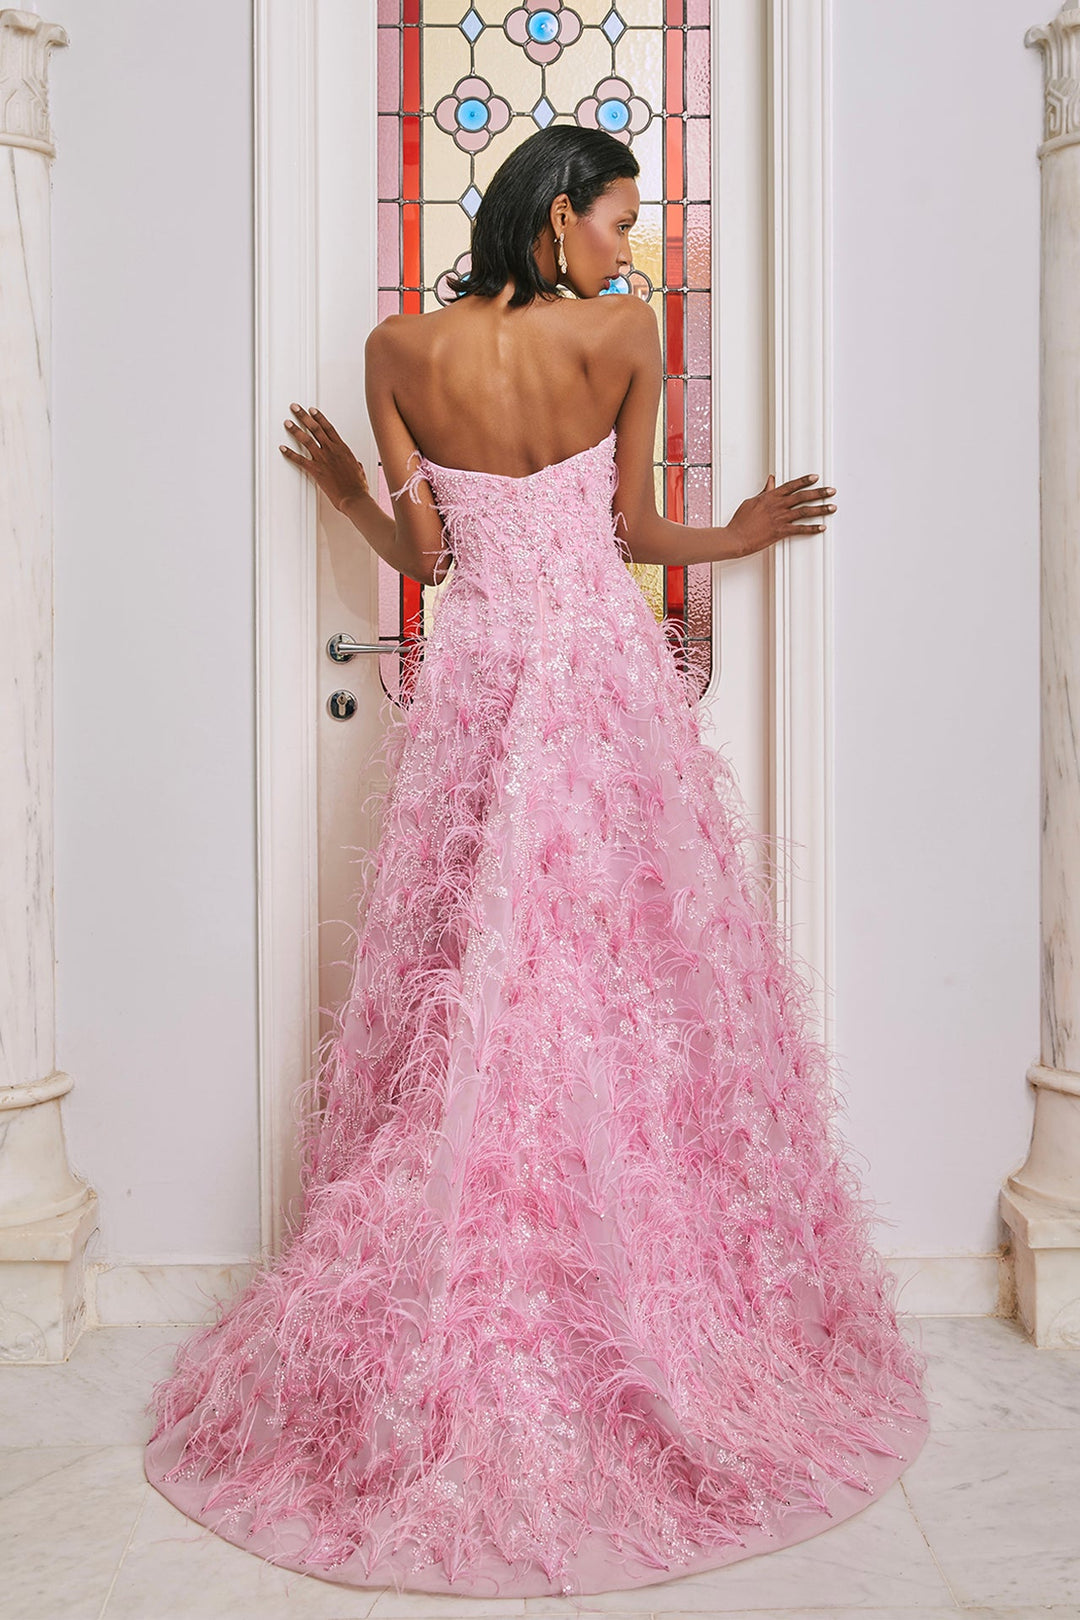 Strapless Princess Dress with Feathers